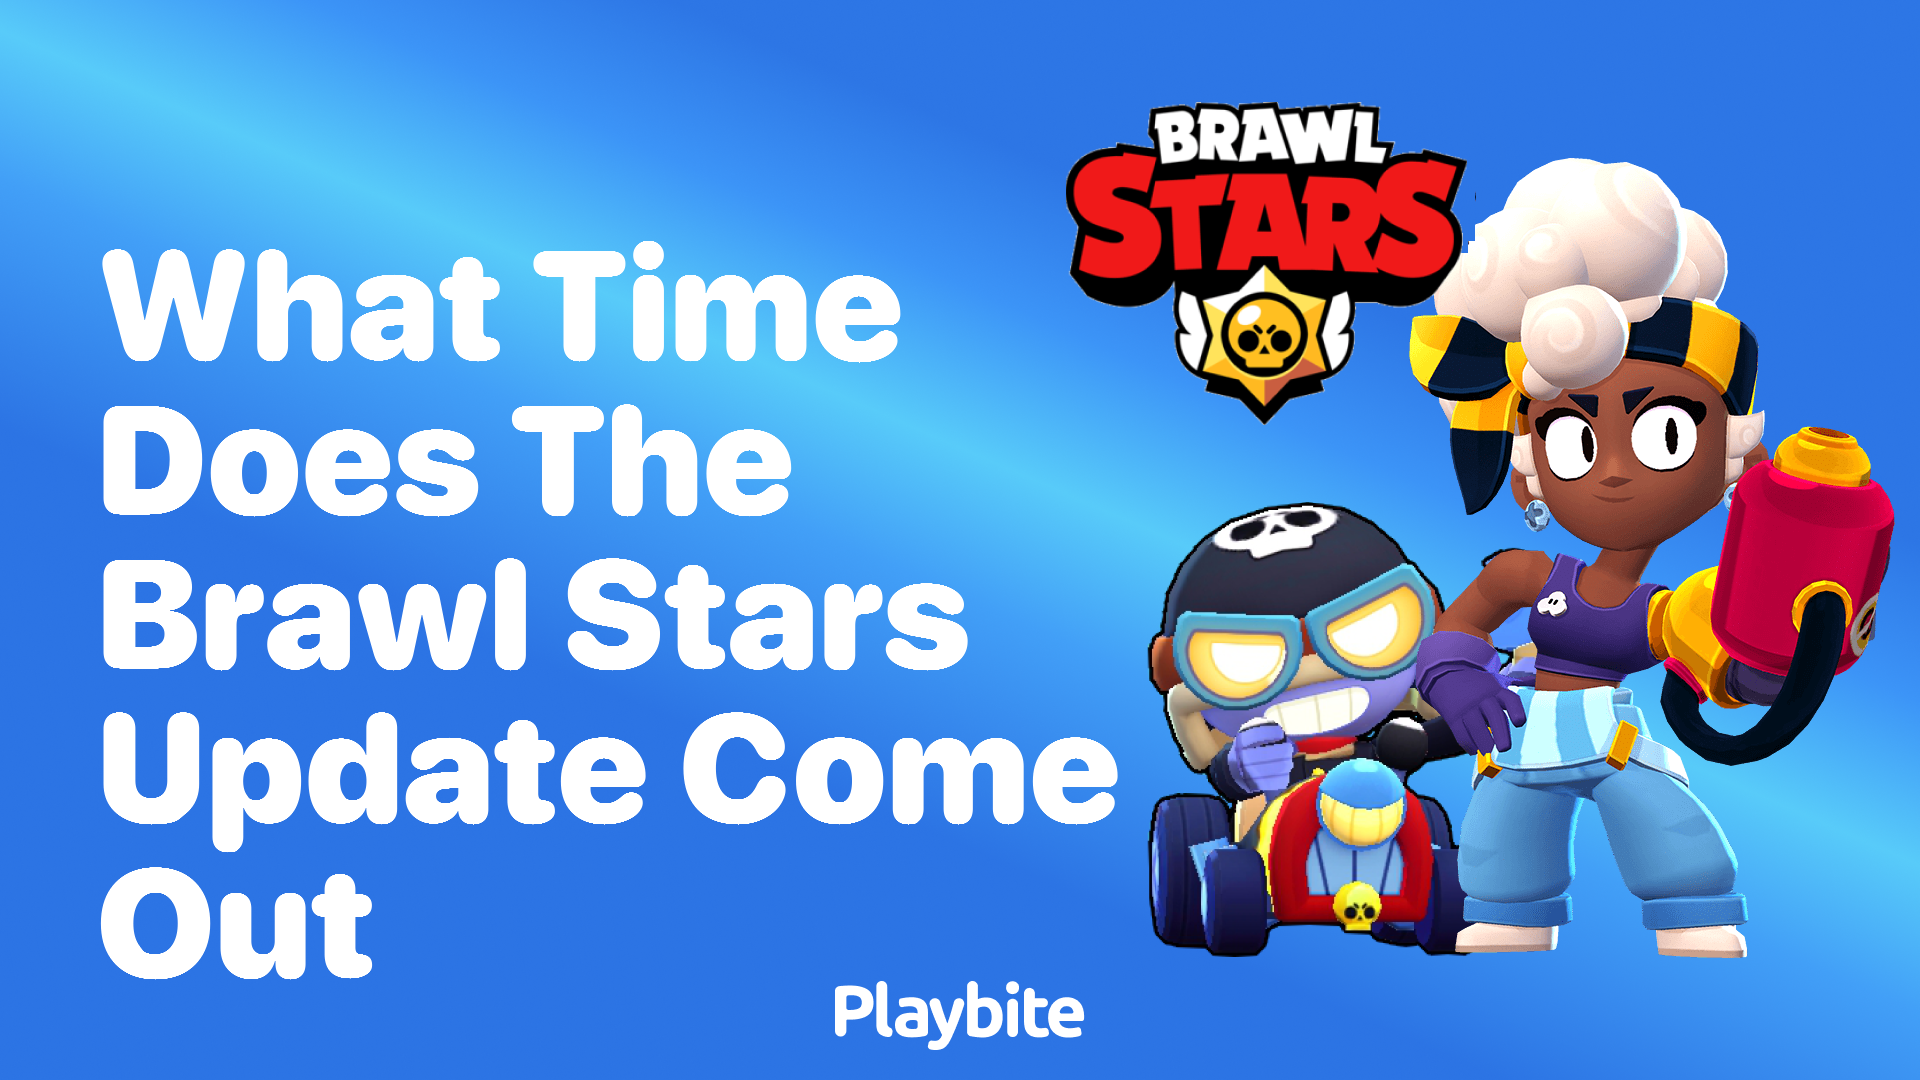 Brawl Stars - The time has come, #BrawlTalk is here